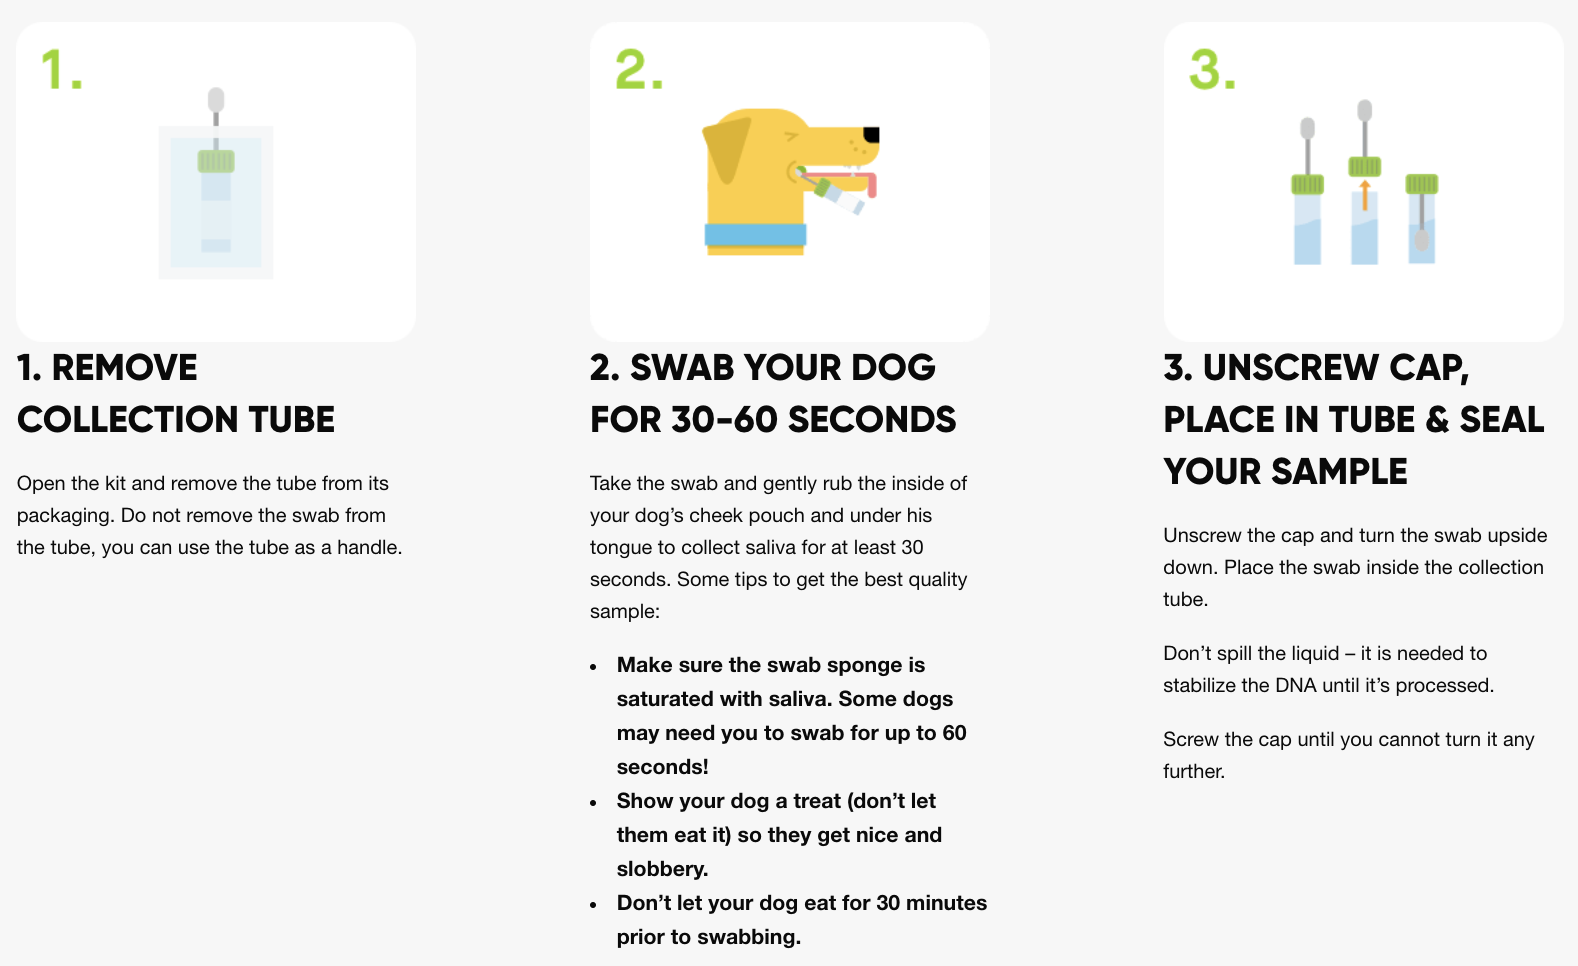 How to Swab Steps 1-3. Step 1: Remove Collection Tube, Step 2: Swab Your Dog for 30-60 Seconds, Step 3: Unscrew Cap, Place in Tube, and Seal Your Sample. See next image for Steps 4-6.